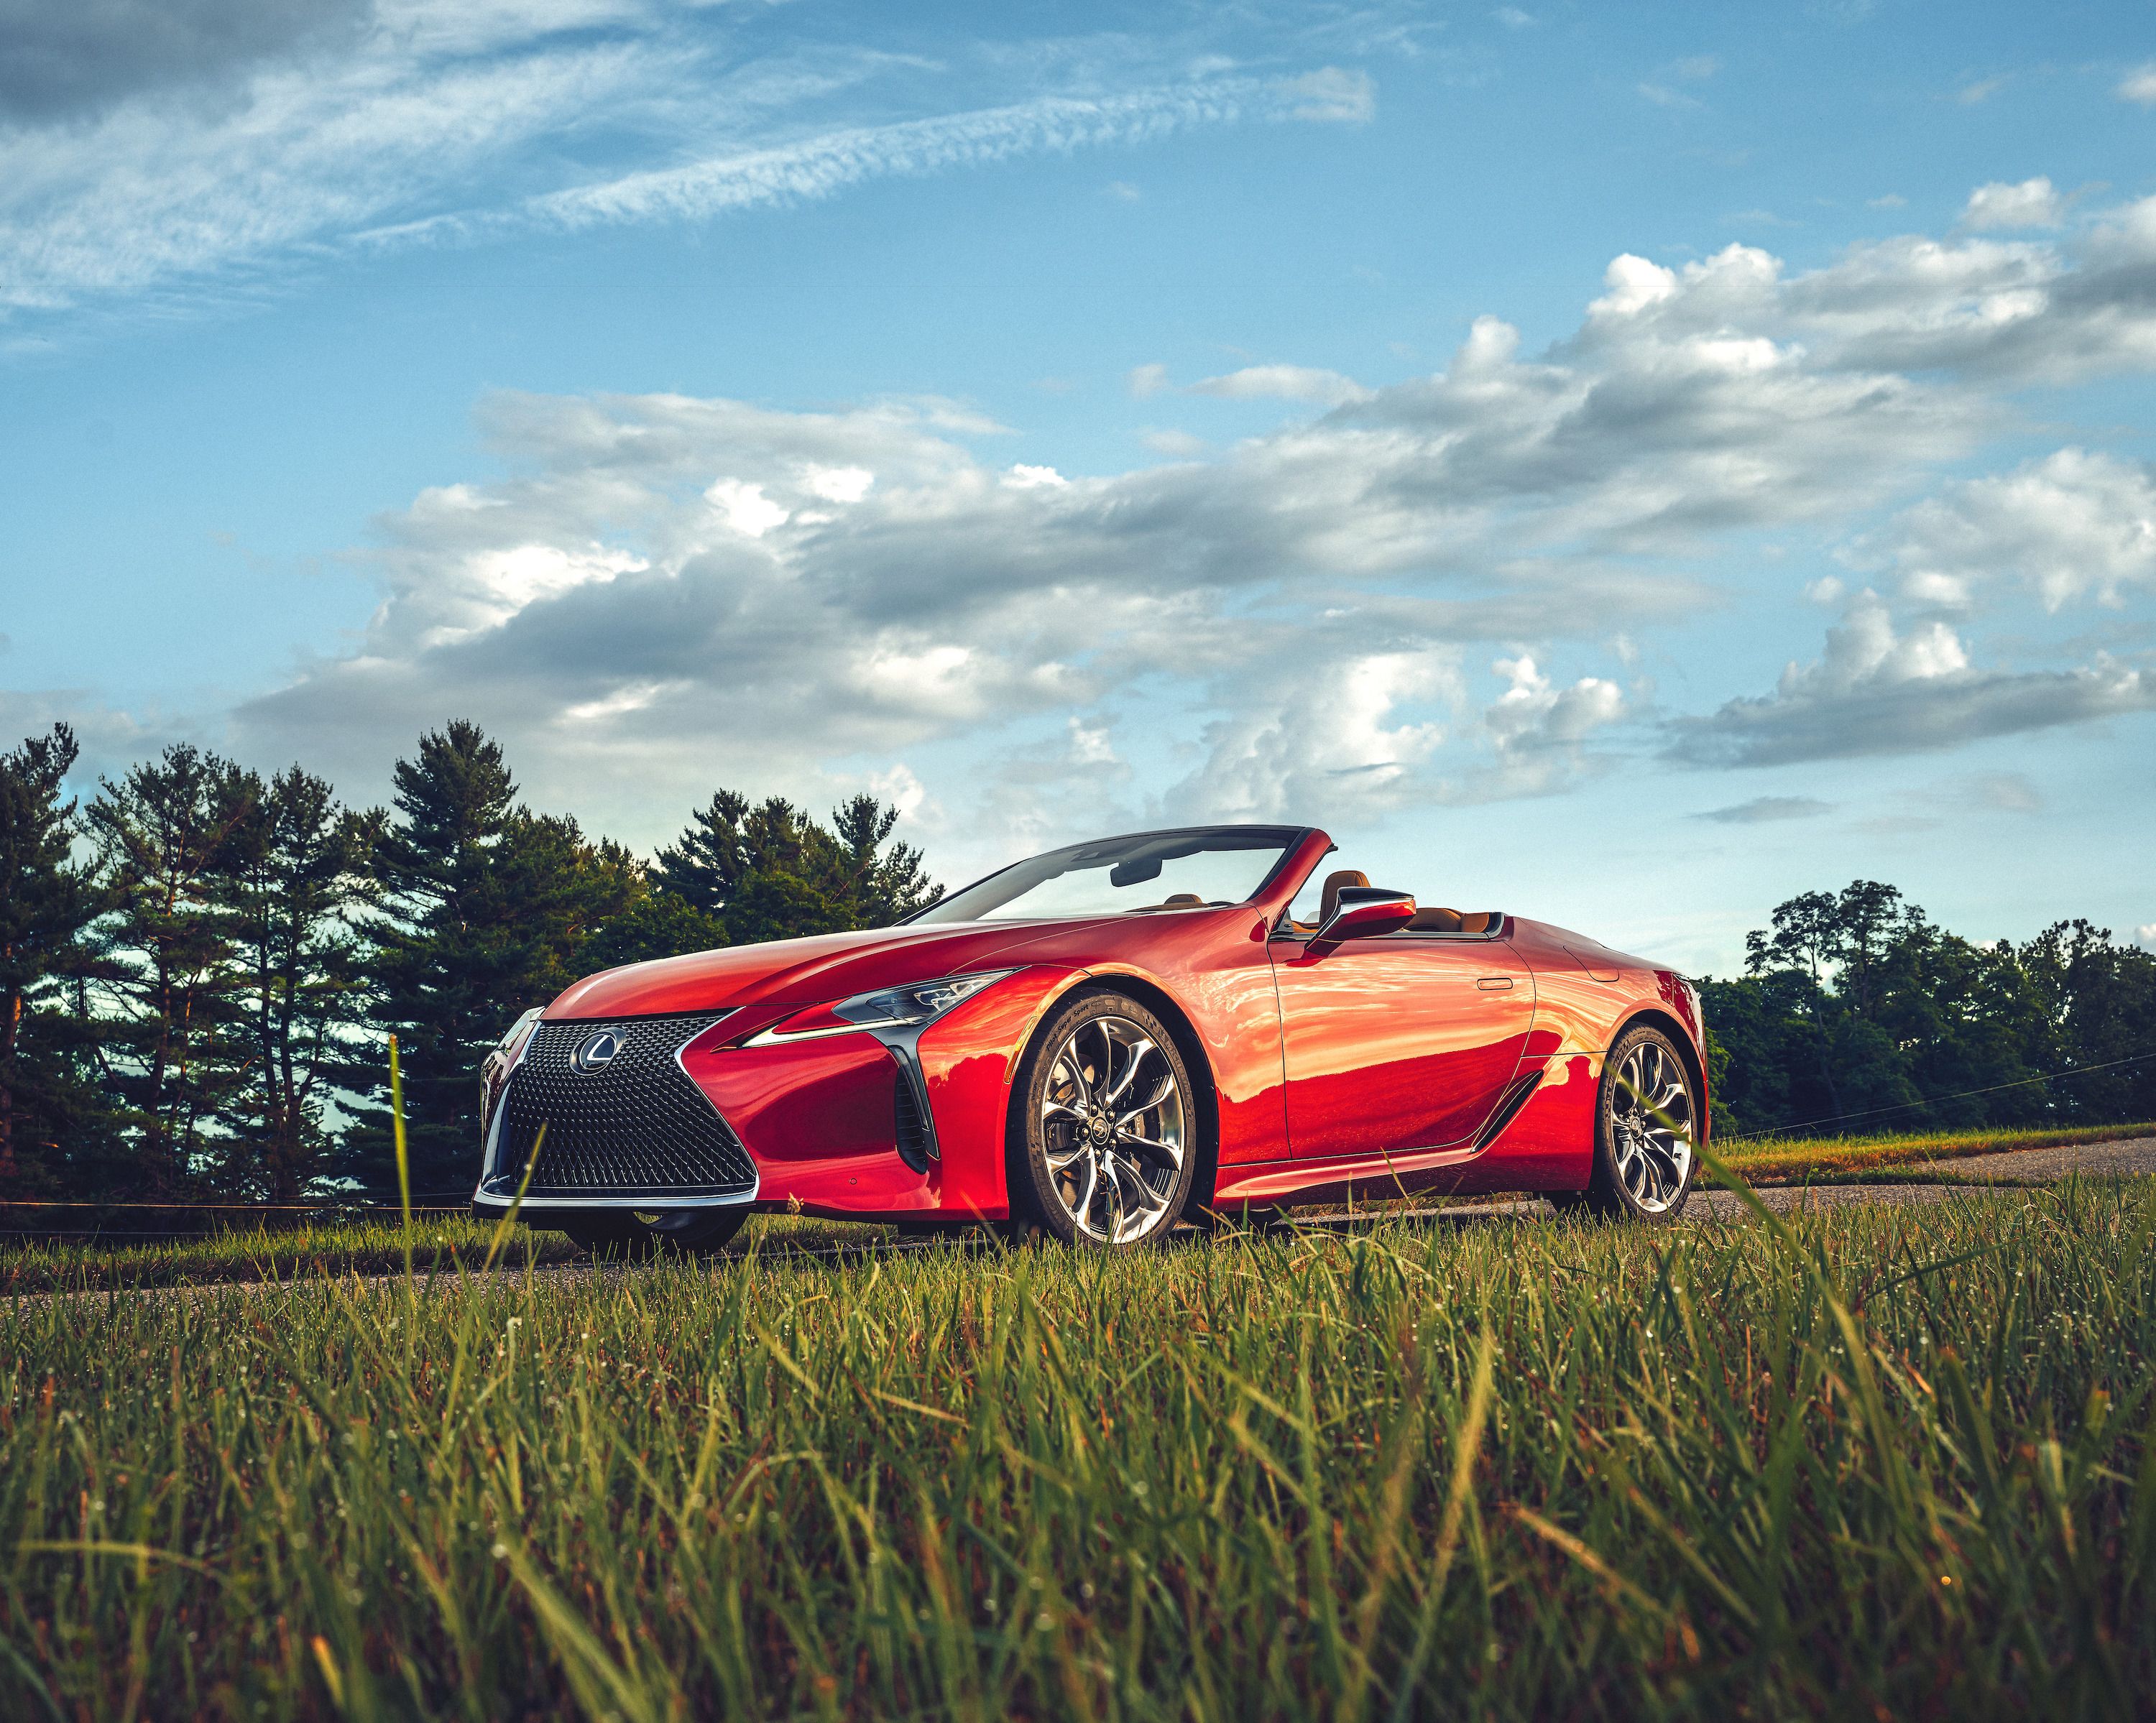 The Lexus Lc500 Convertible Is The Gt Car At Its Best Review